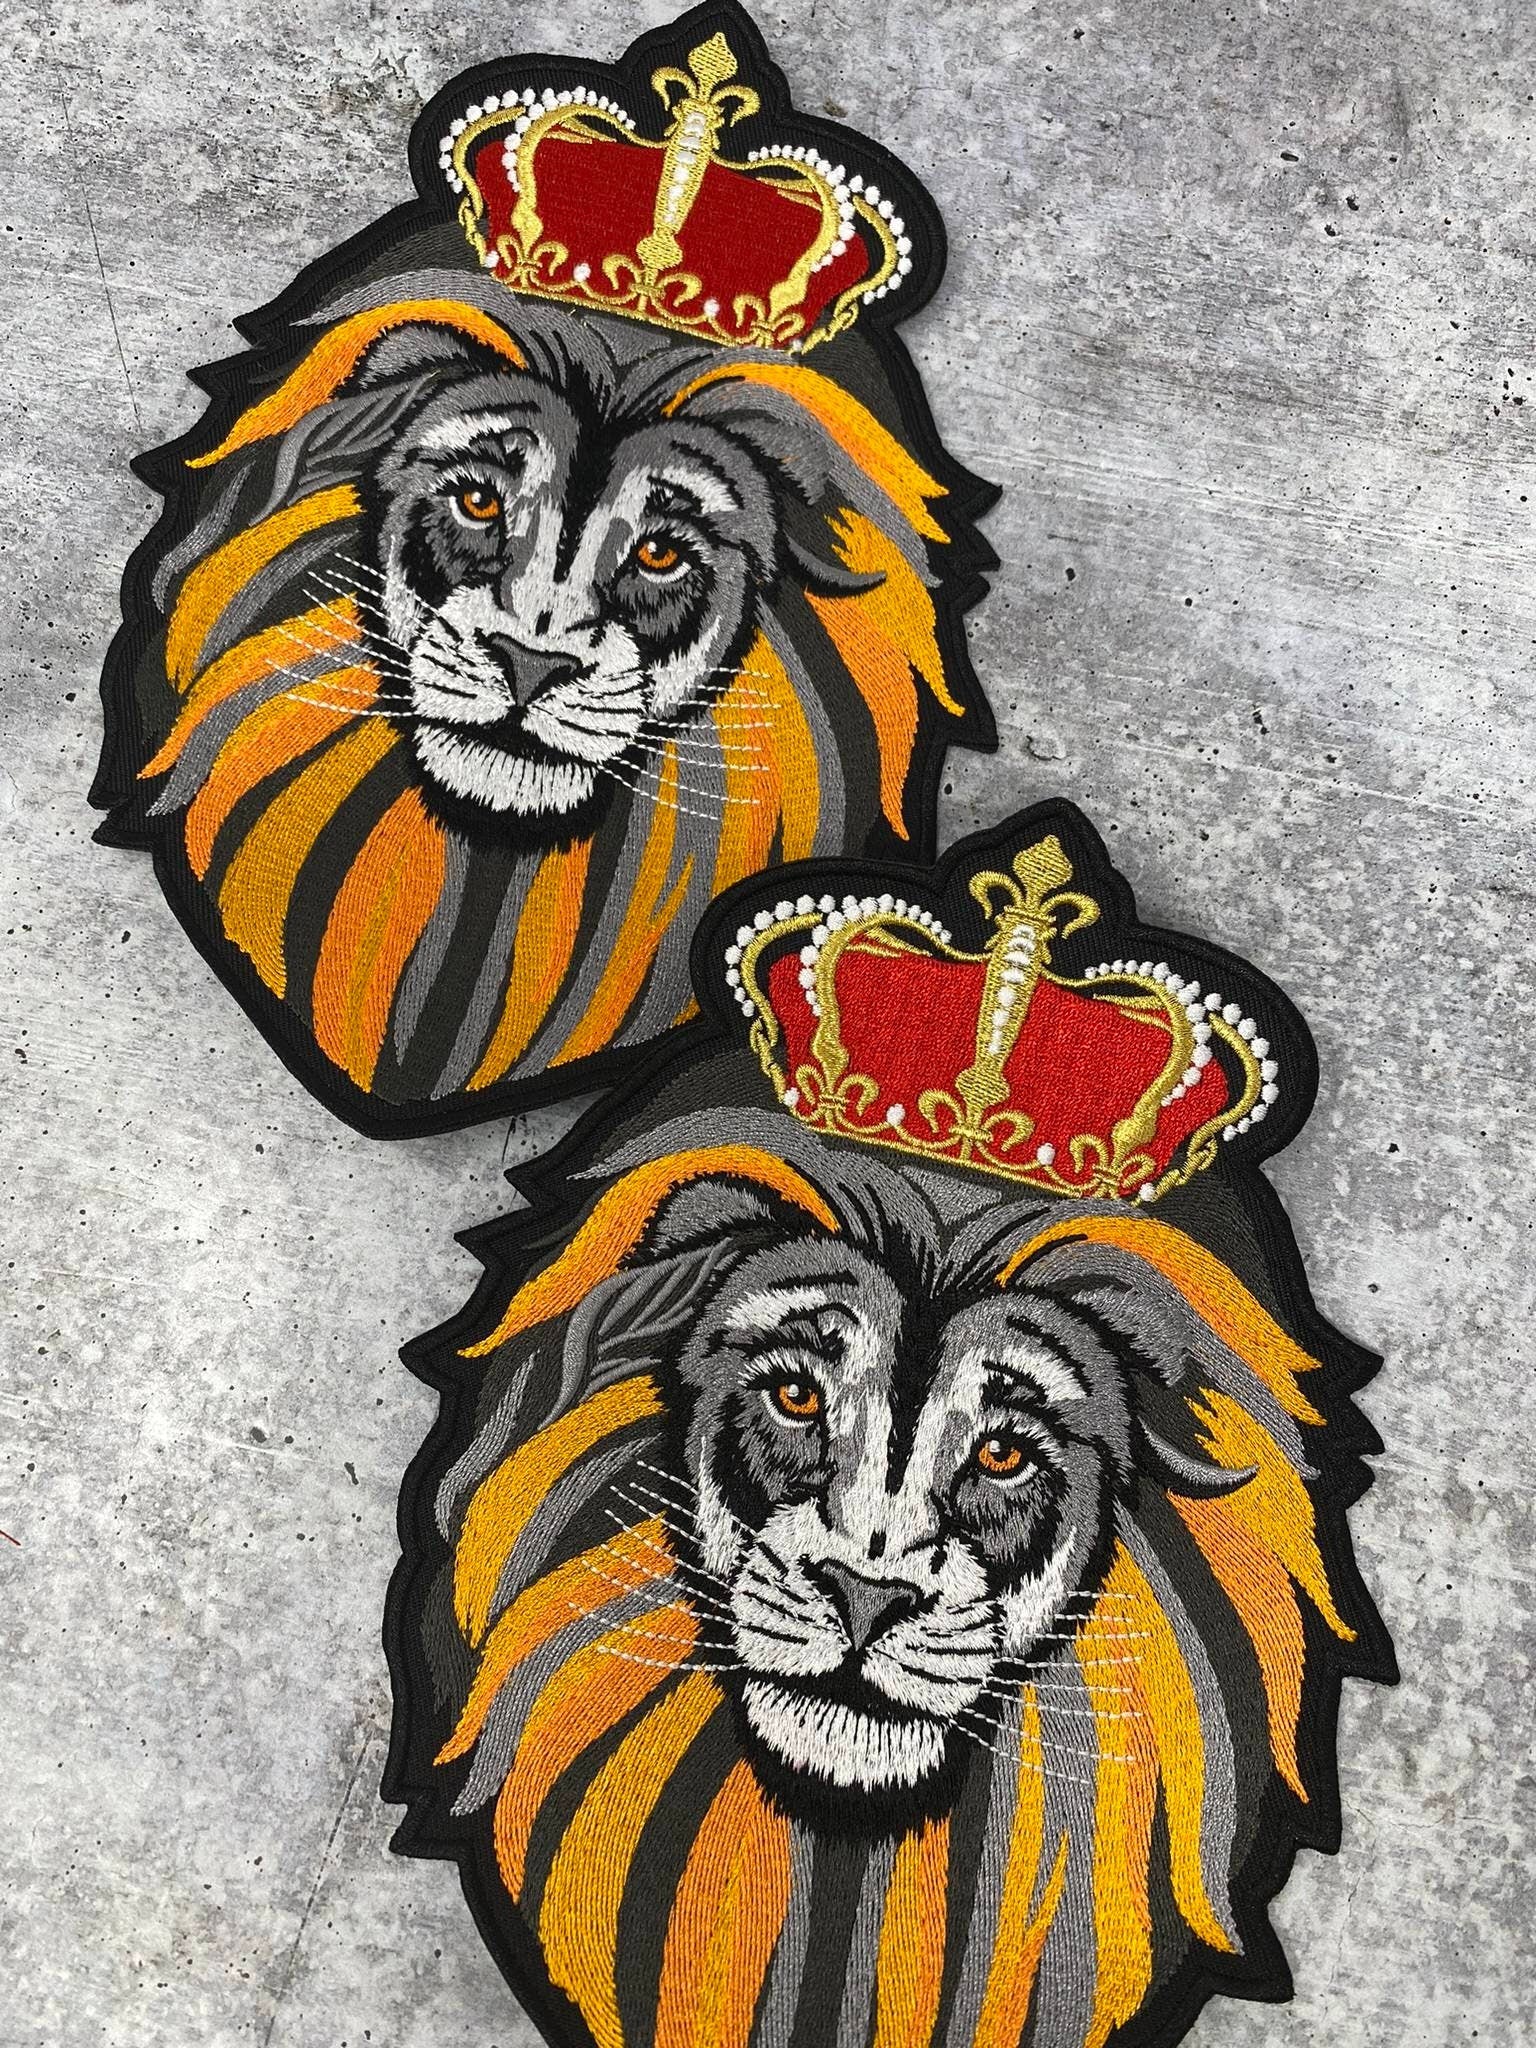 4pcs/pack Black King With Crown Lion Iron On Patches For Clothing Designs  Lion Power DIY Heat Transfer Decals On Clothes